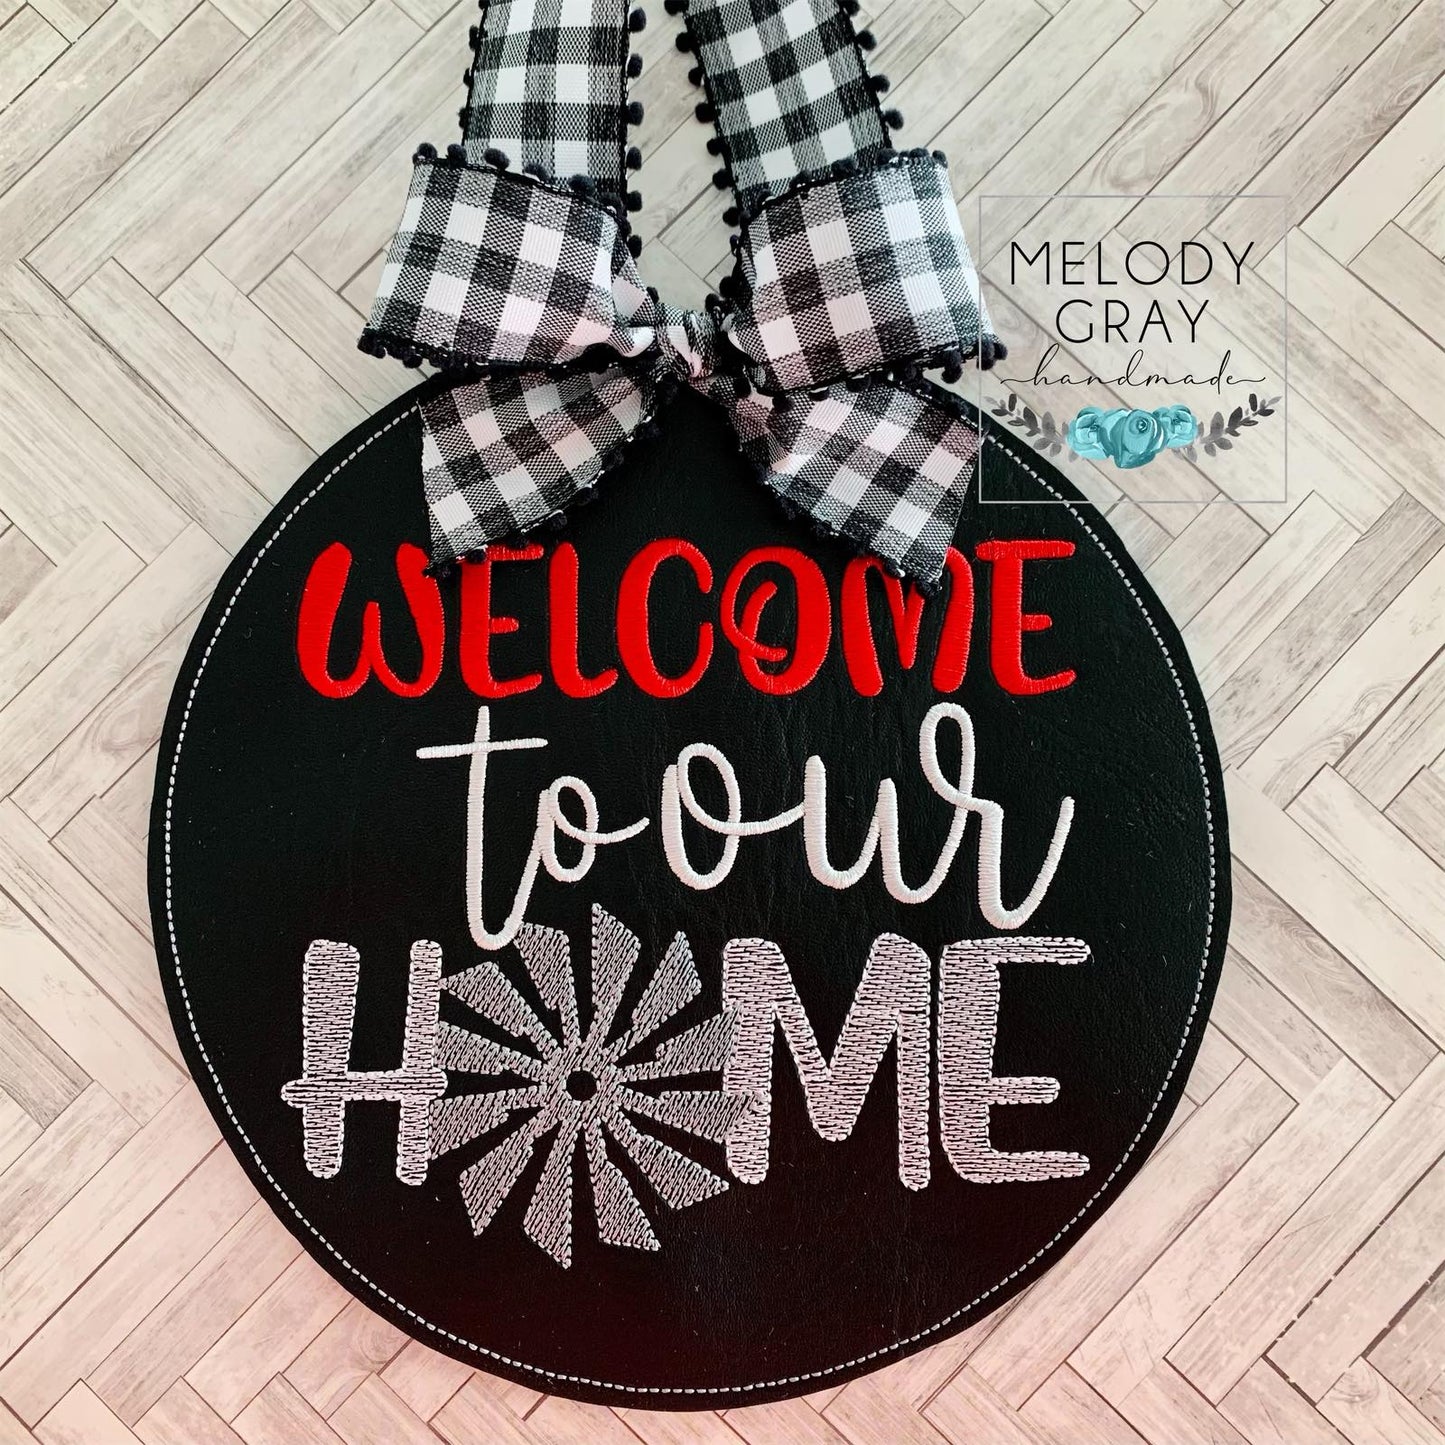 Welcome to our Home Windmill Door Hanger - 3 sizes - Digital Embroidery Design